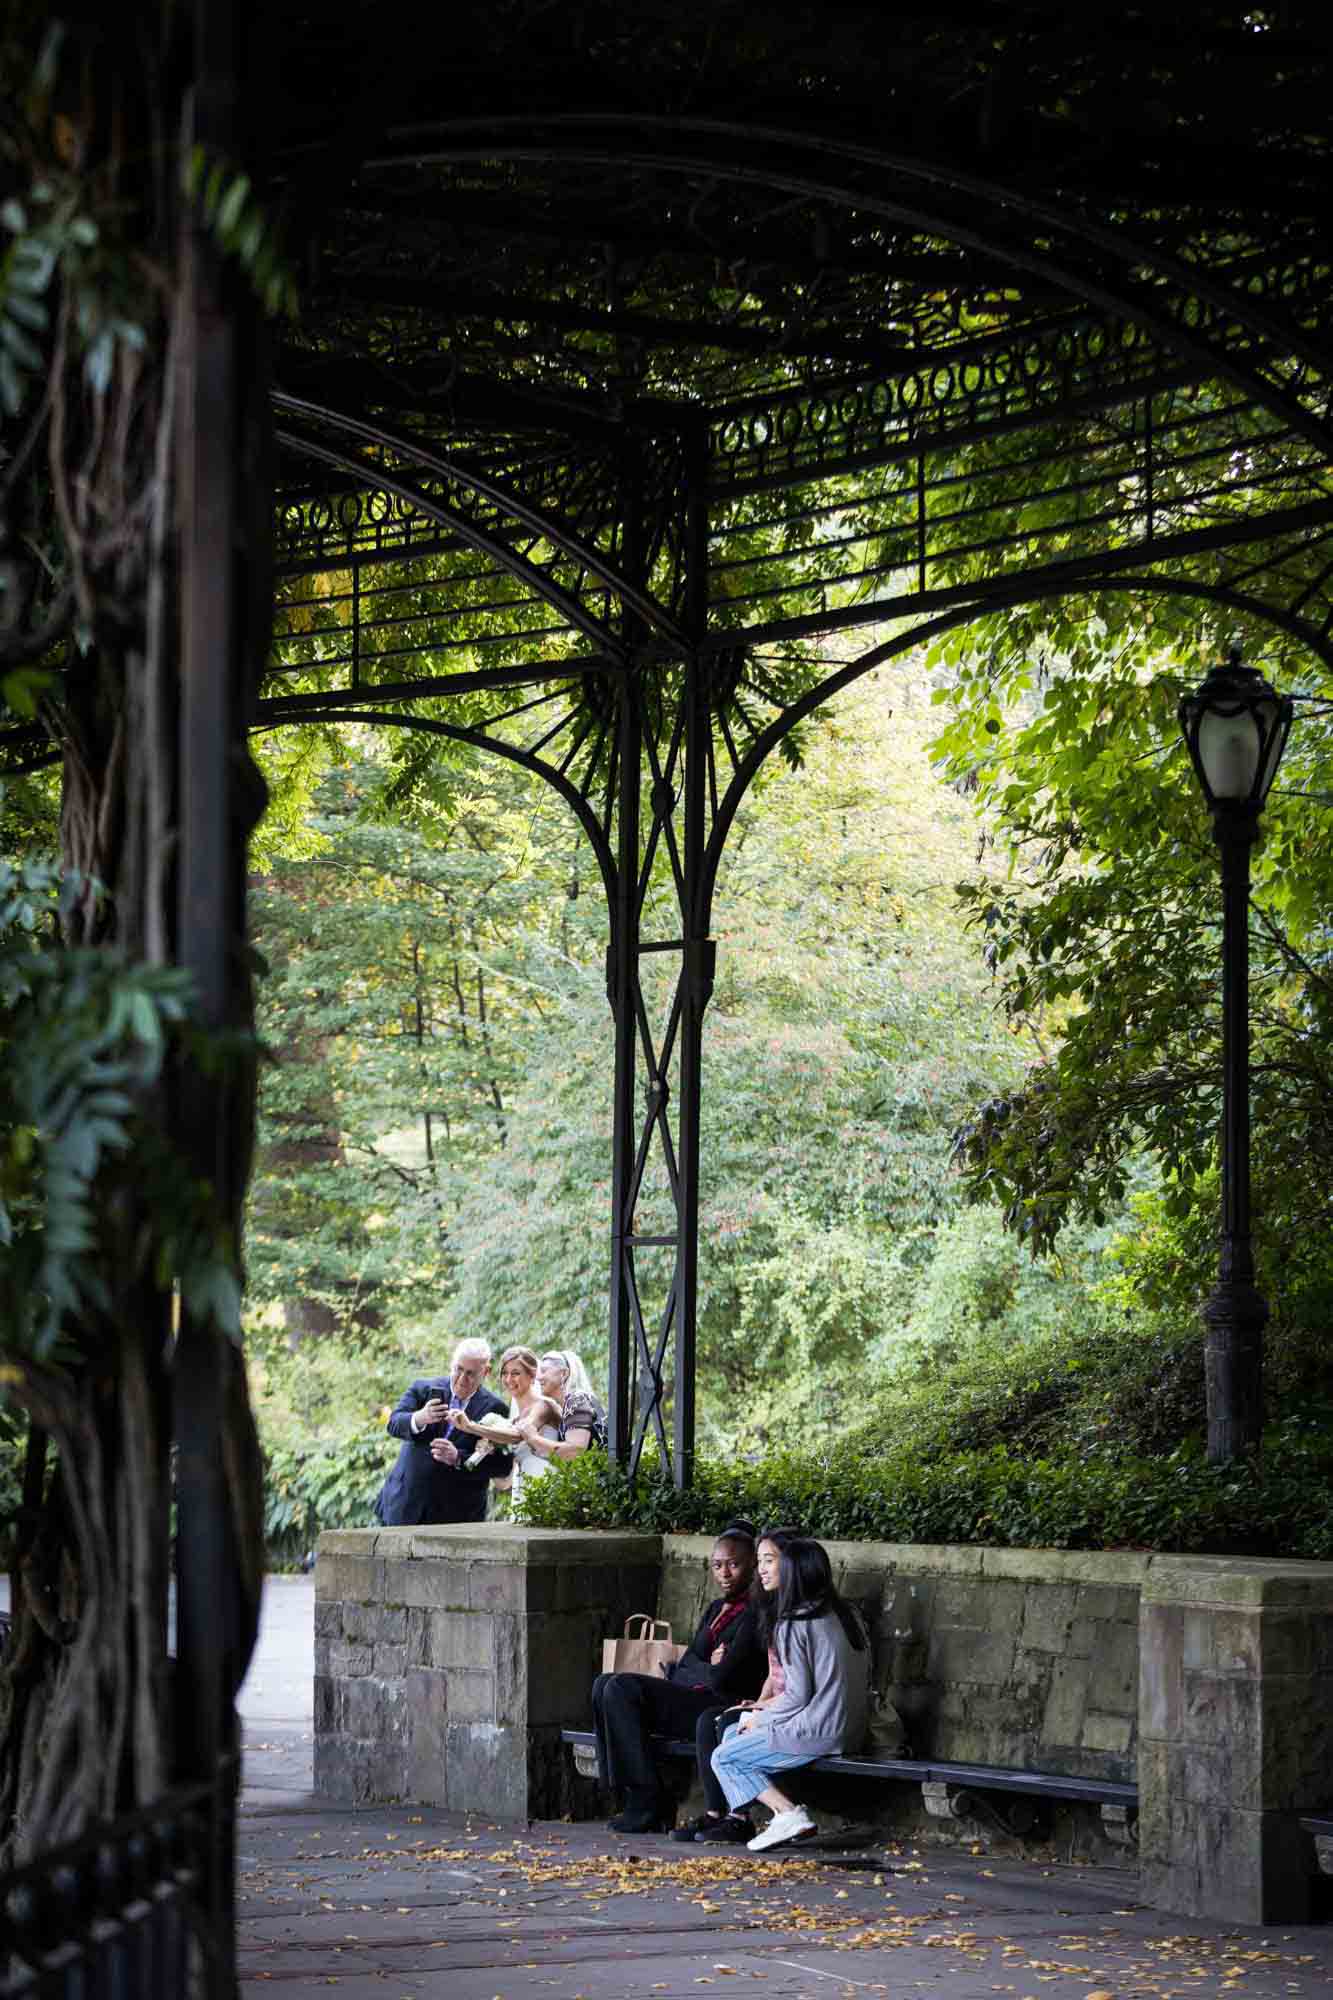 Park visitors sitting on bench during a Conservatory Garden wedding in Central Park